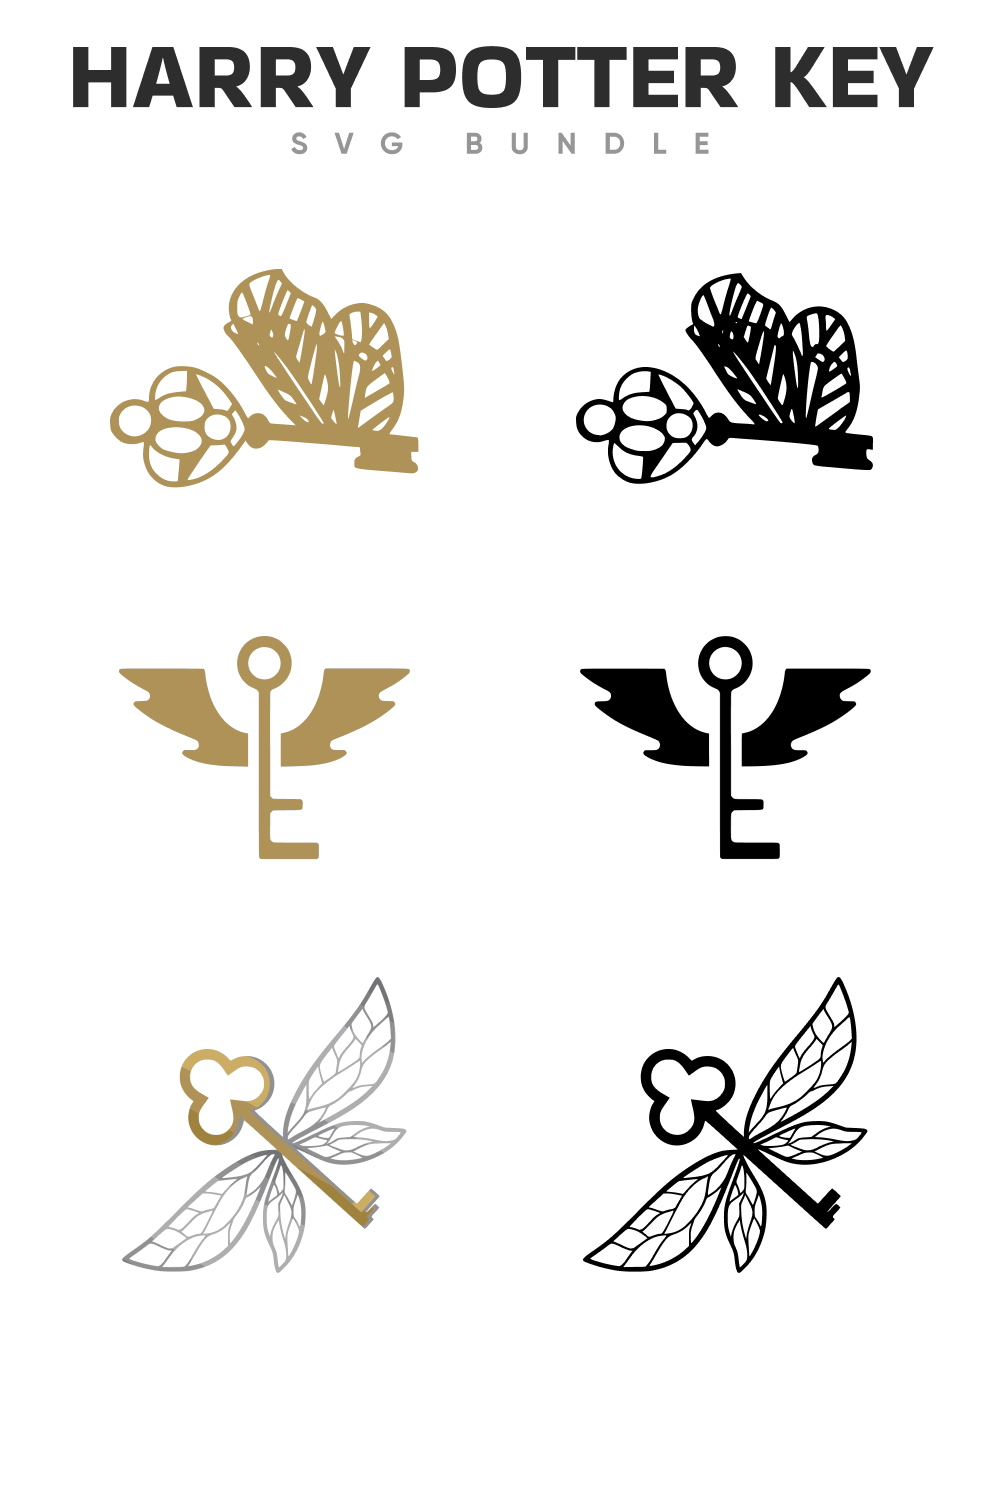 Six gold and black Harry Potter-themed keys on a white background with a caption.